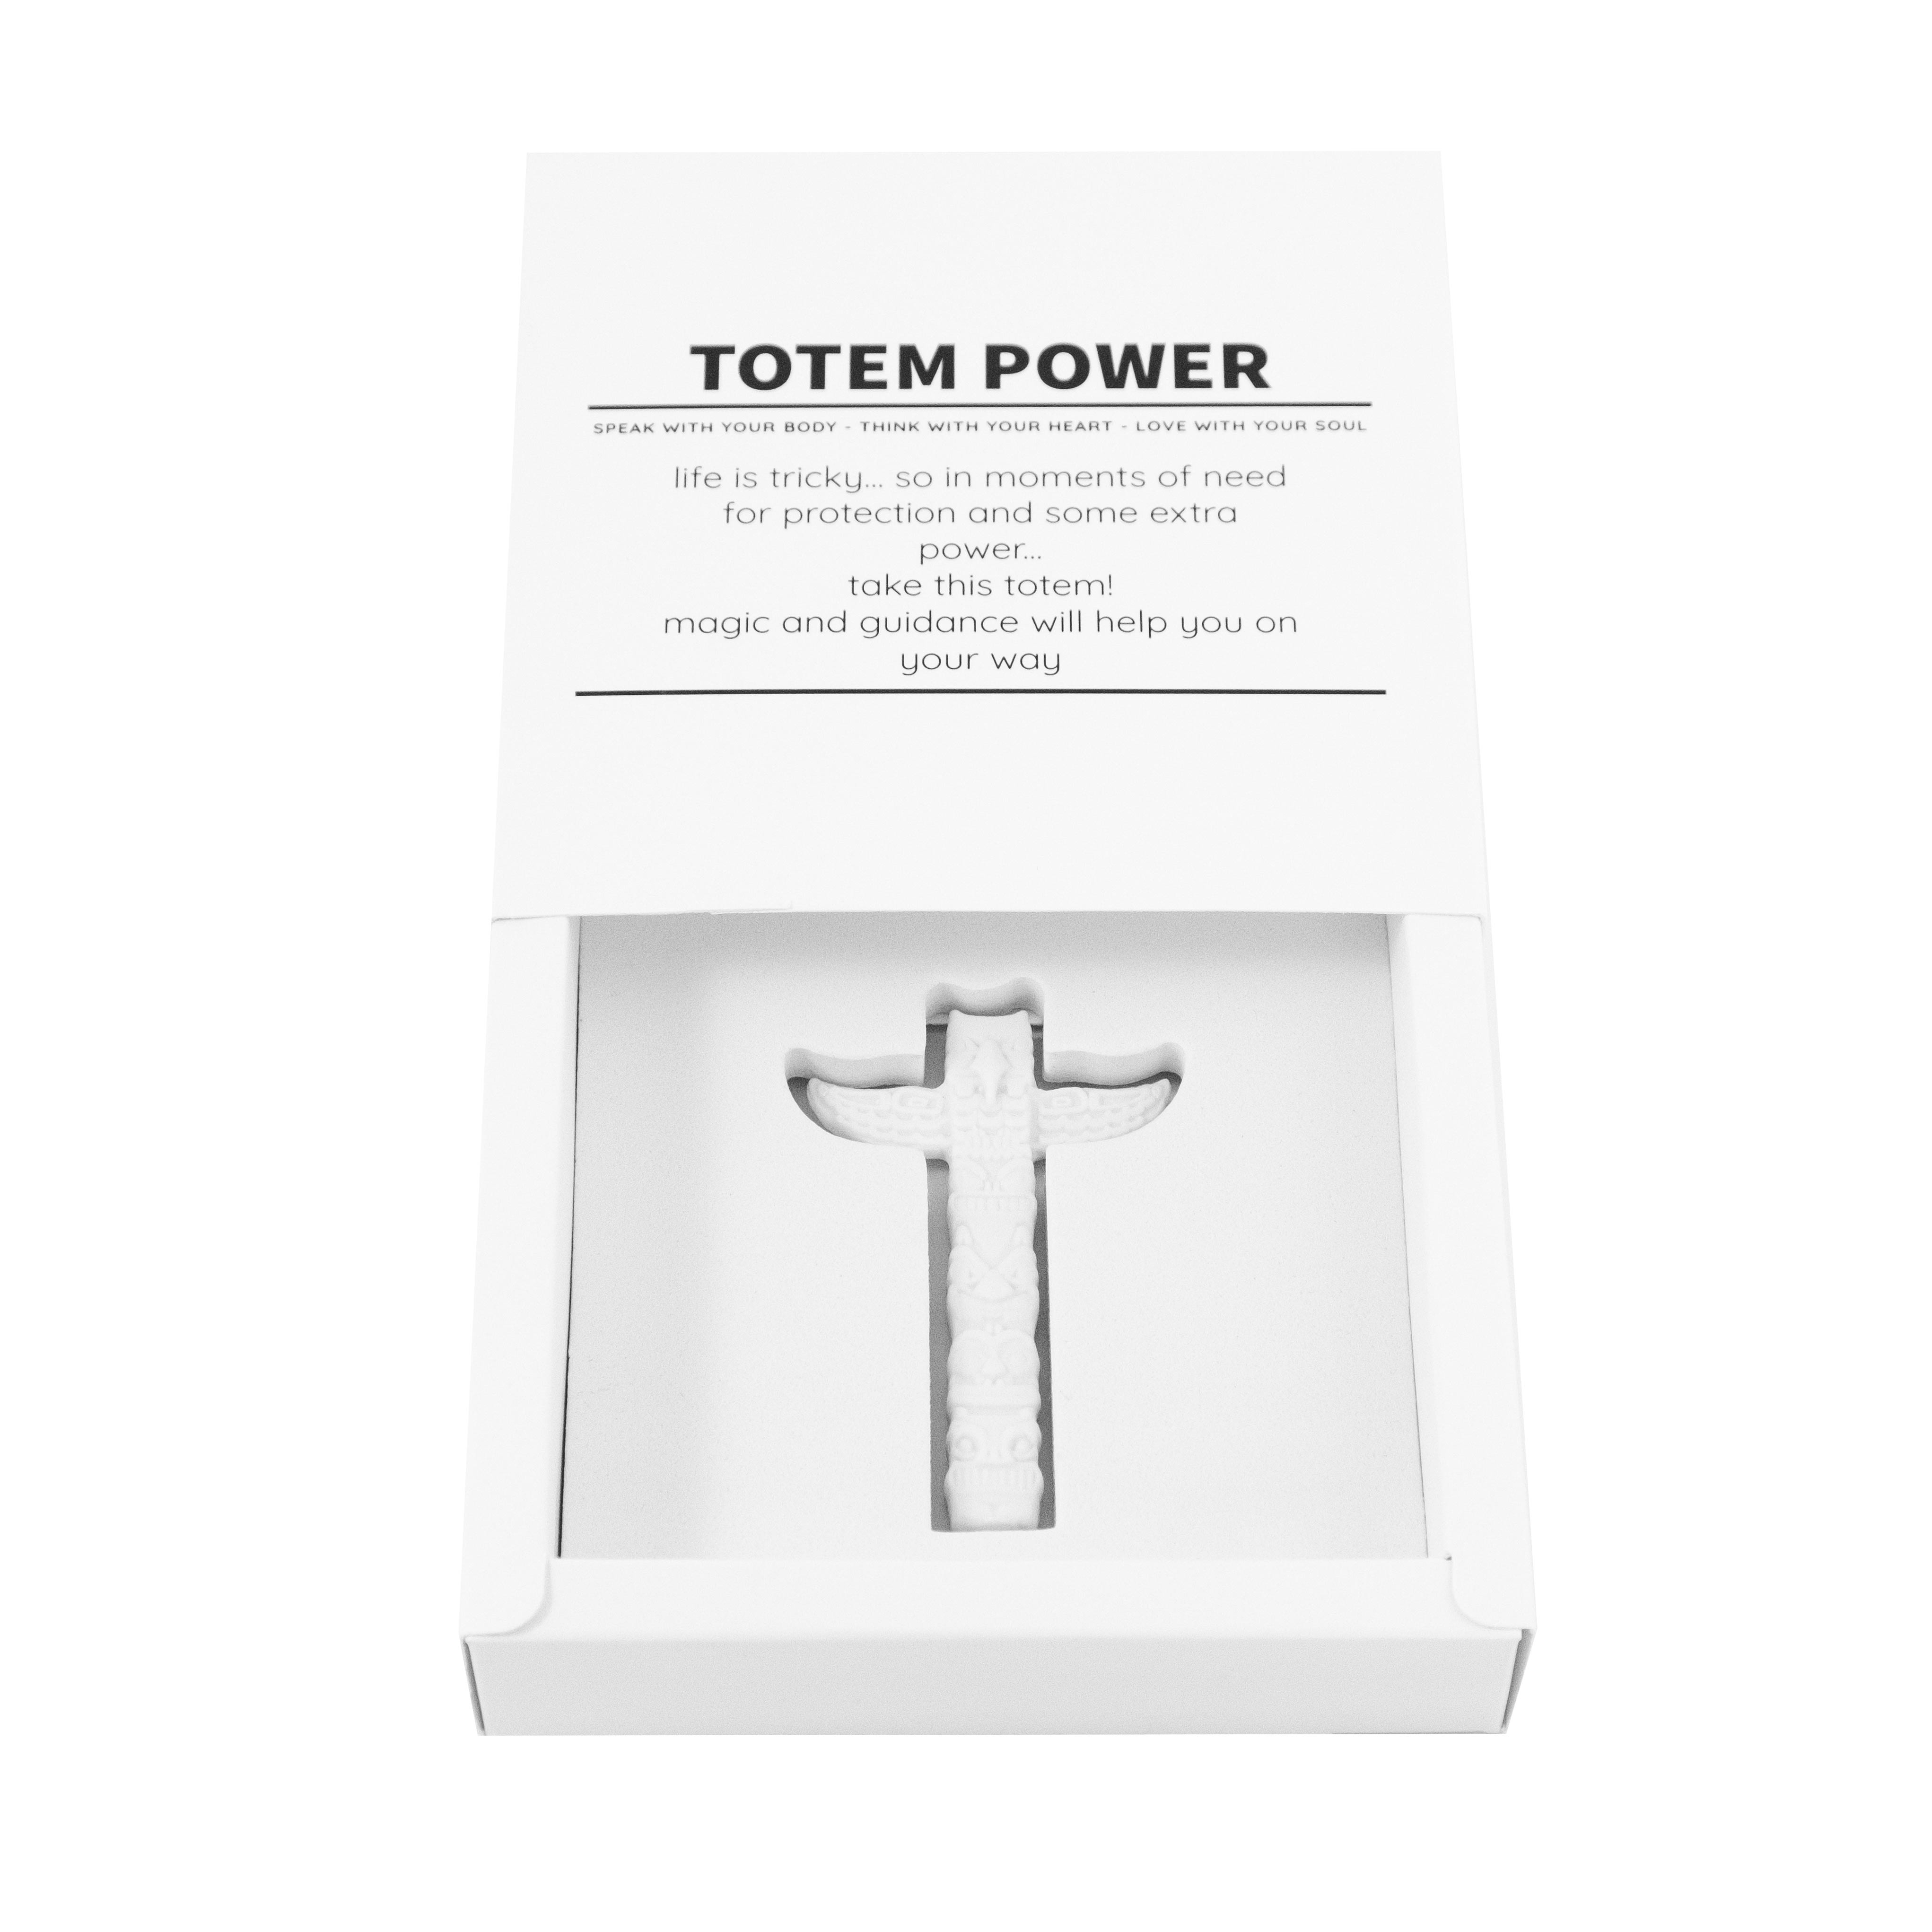 Totempower